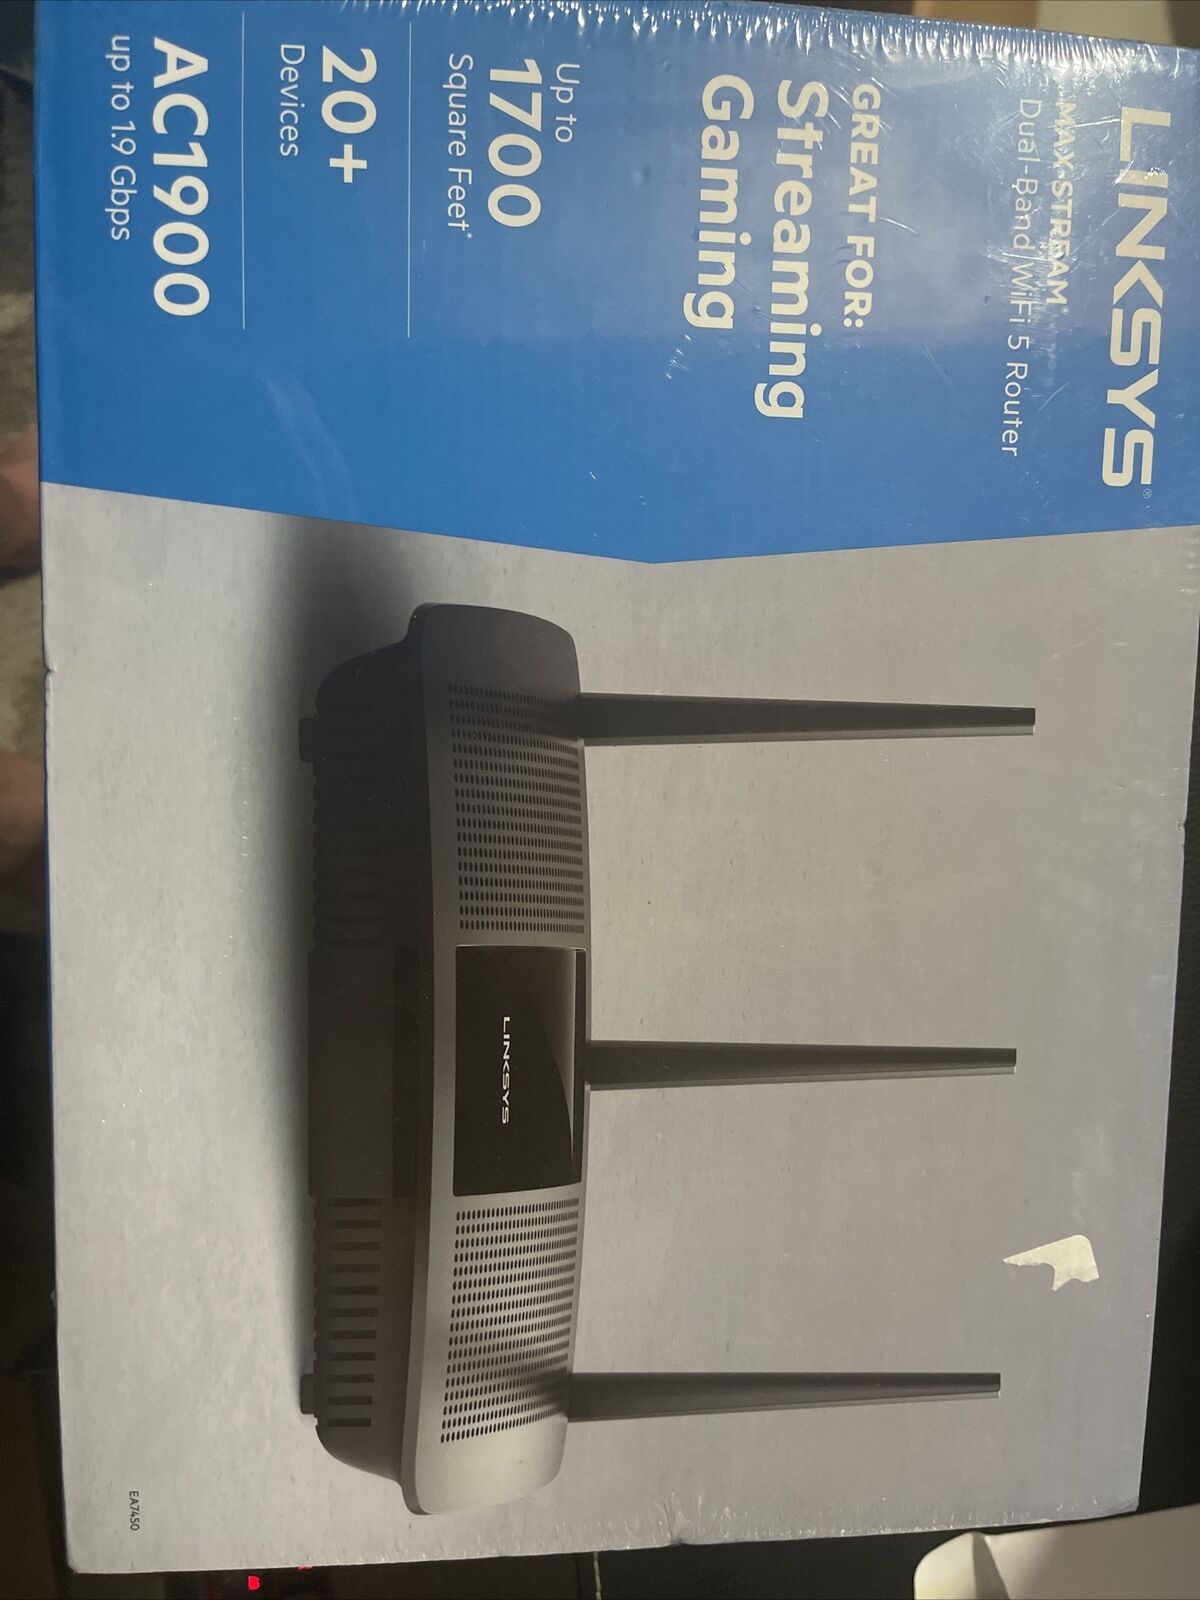 NEW Linksys R74 EA7450 Max-Stream AC1900 Wireless Dual-Band Gigabit Router